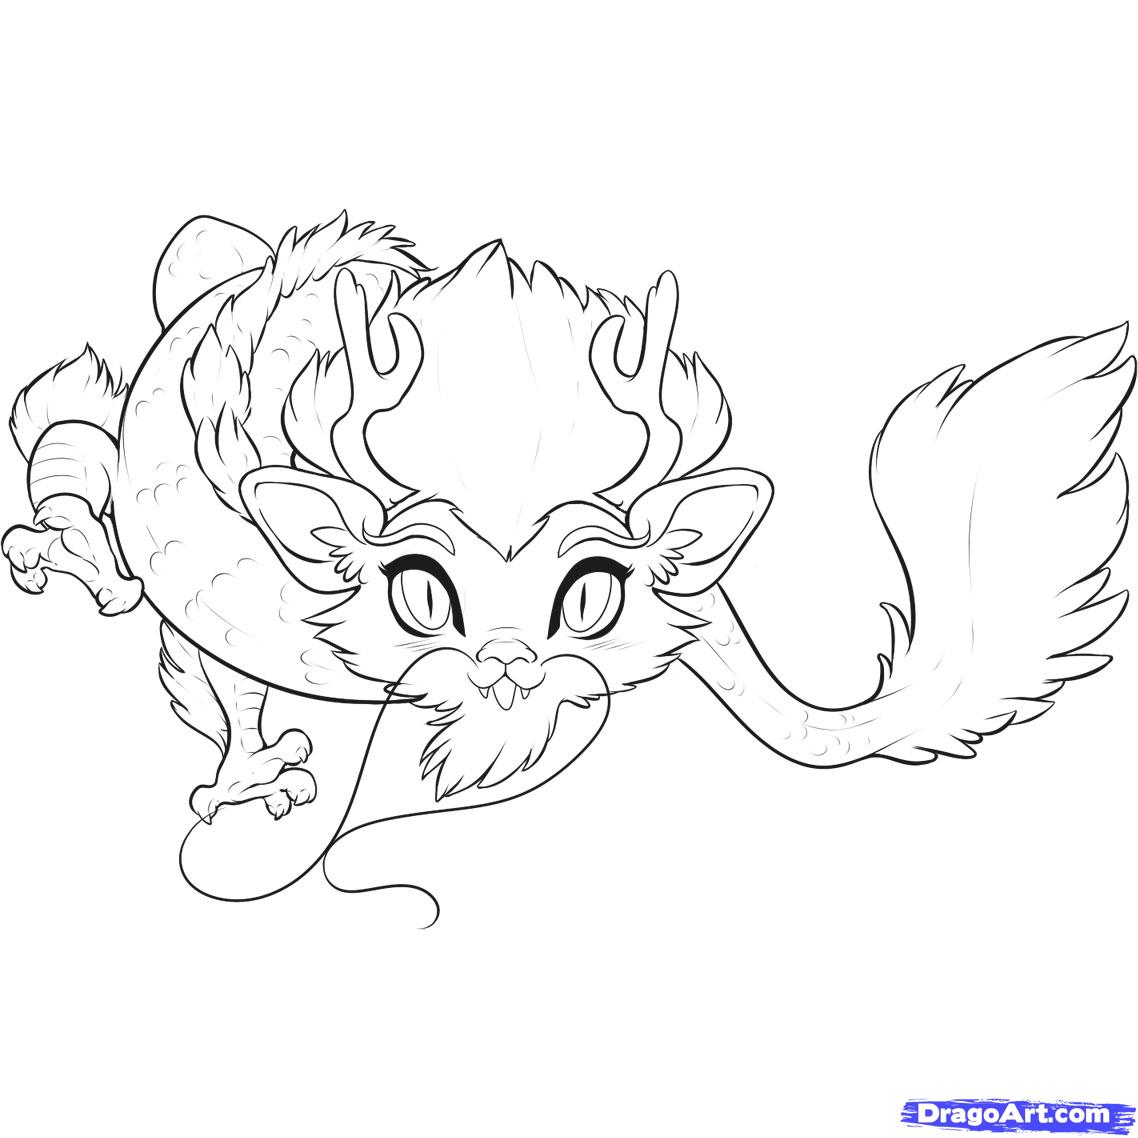 How to Draw a Chibi Chinese Dragon, Step by Step, Chibis, Draw 